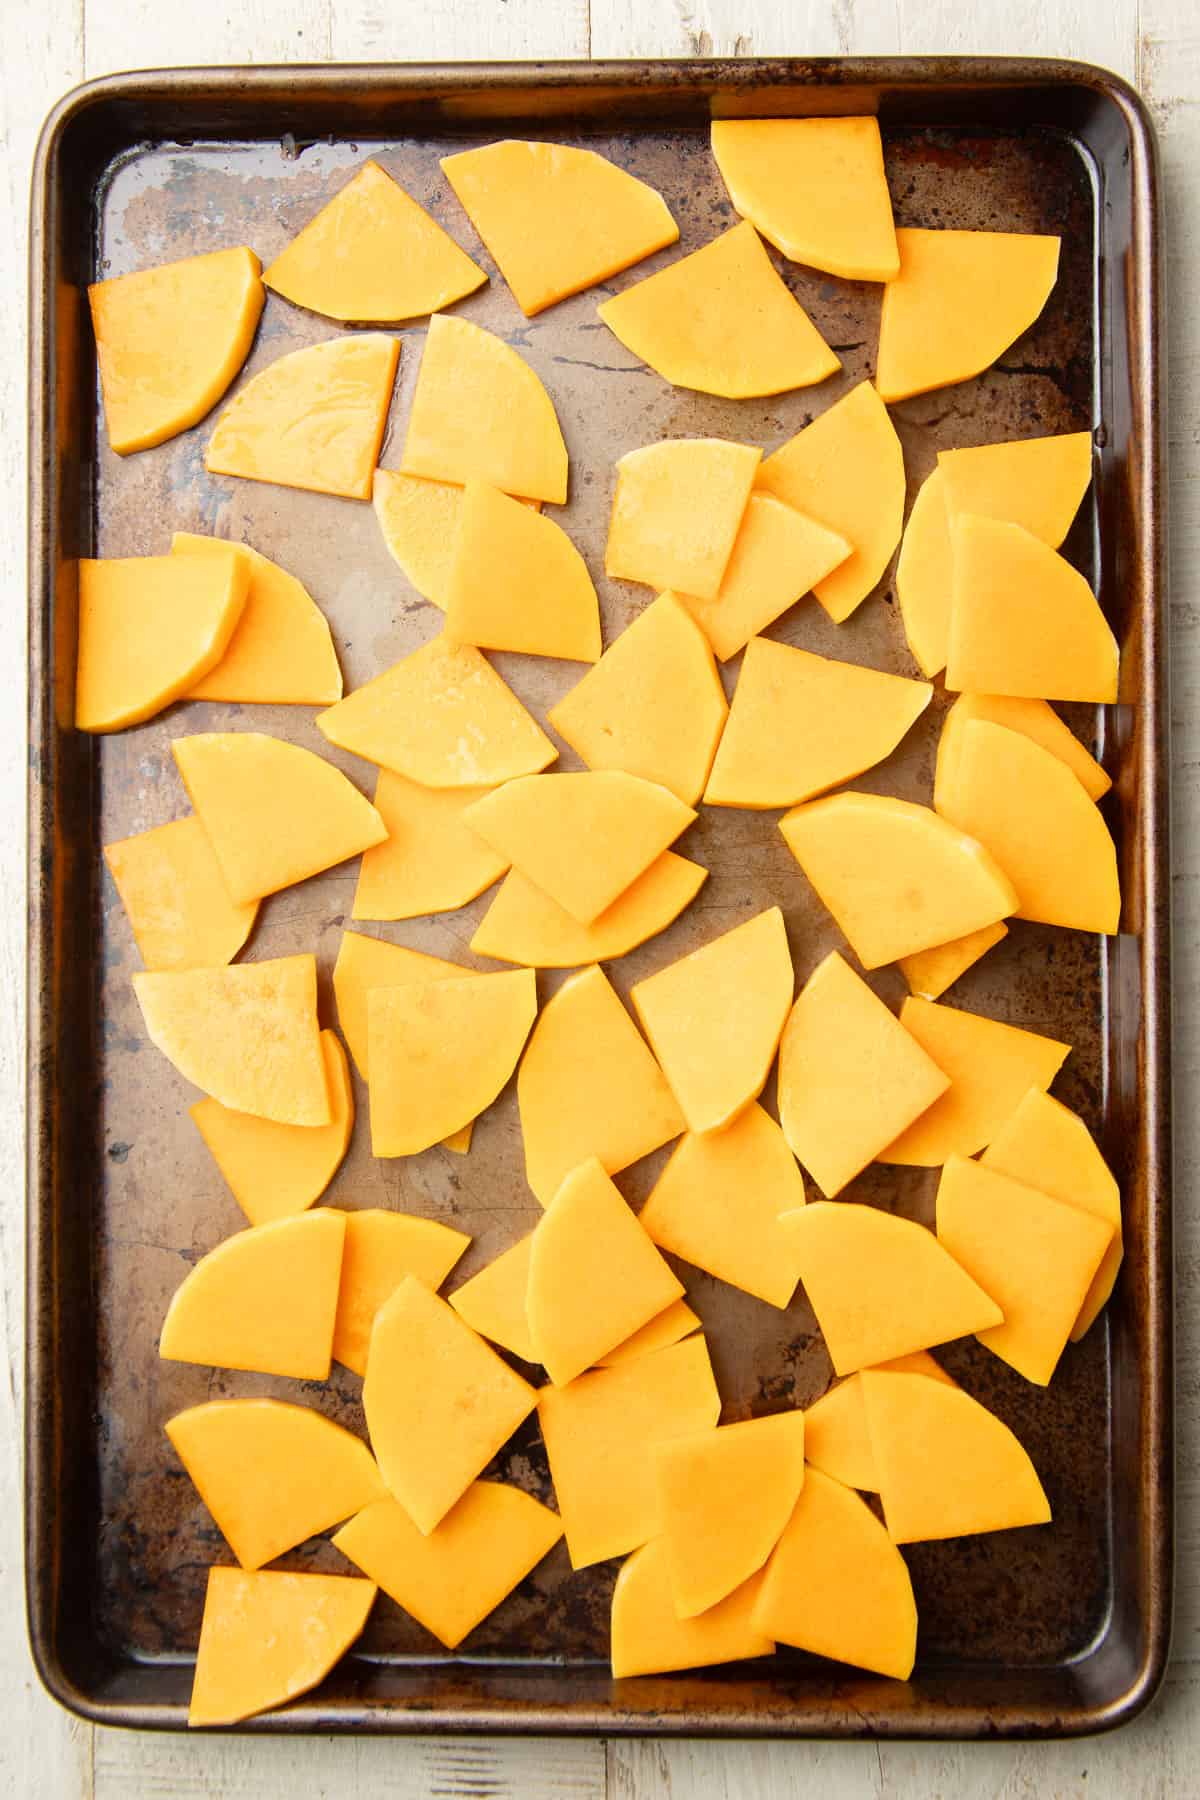 Butternut squash slices on a baking sheet.